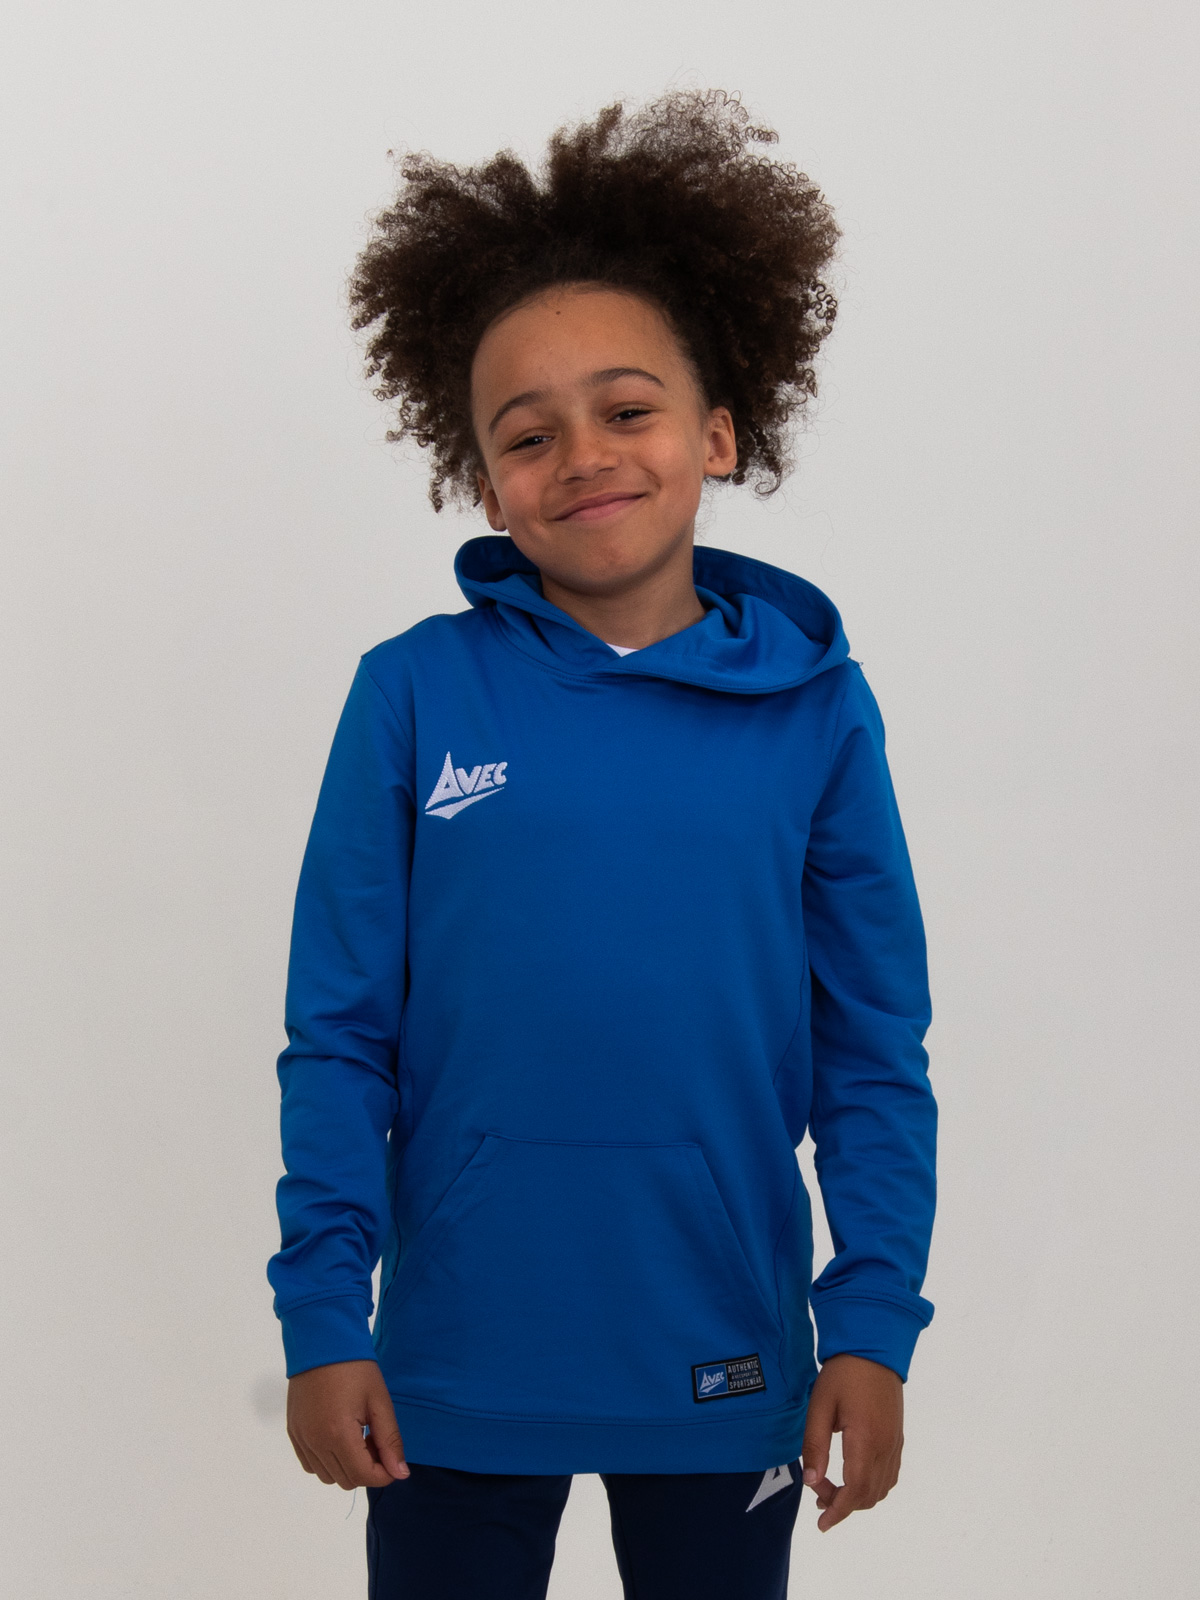 a cool blue kids hoody is worn by a young child